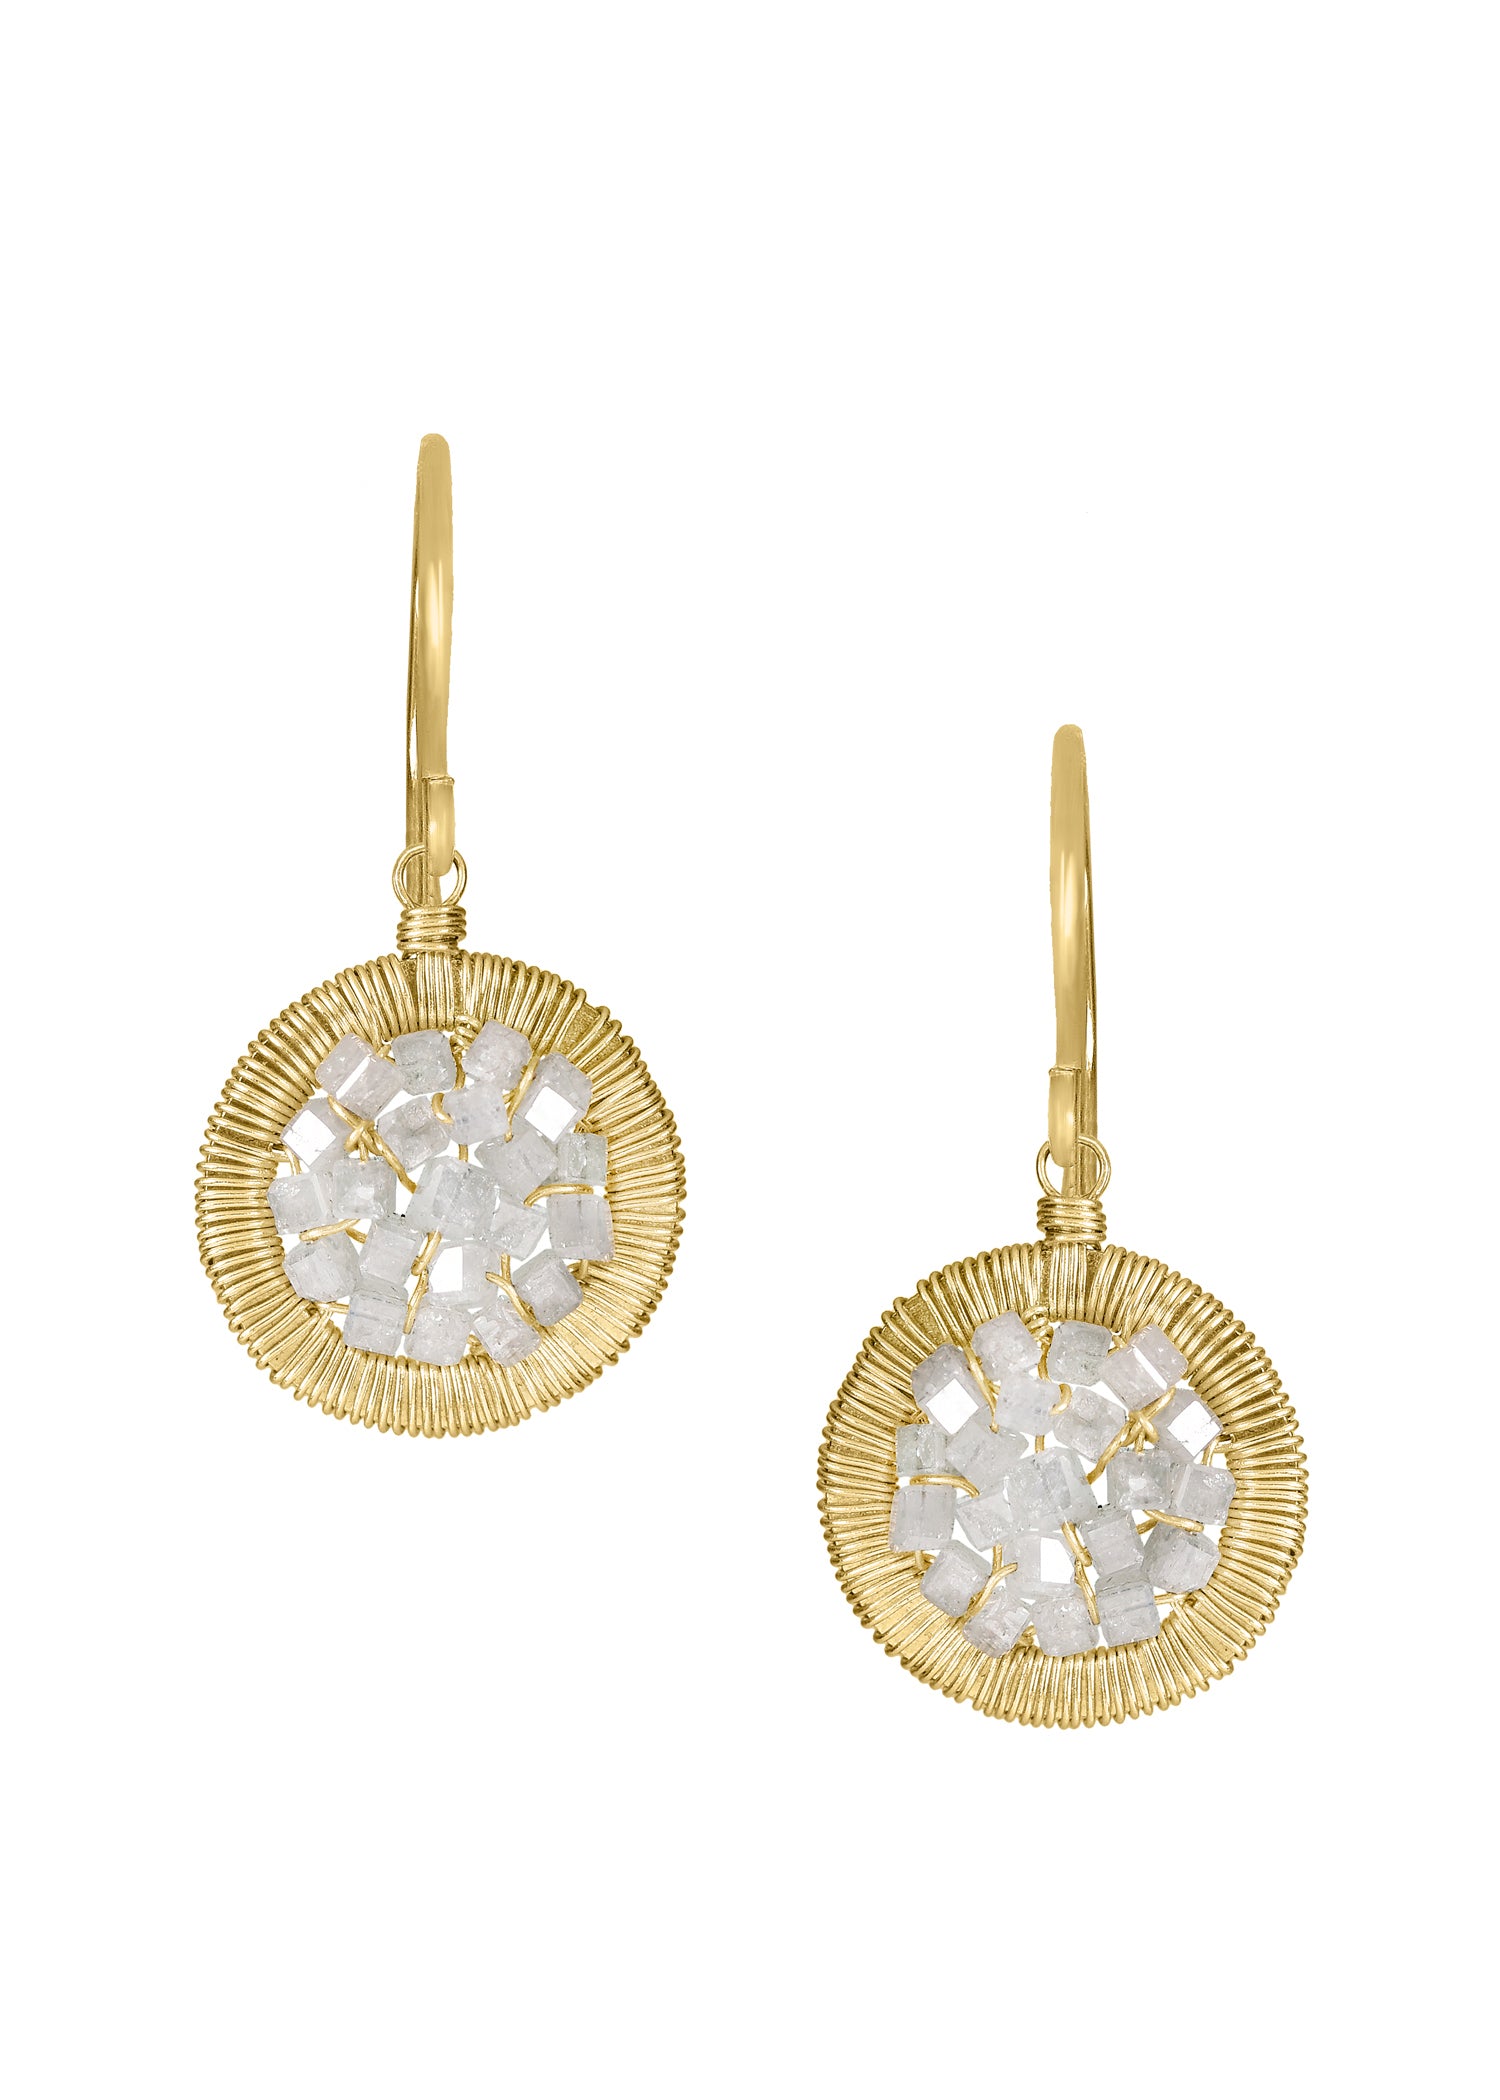 Diamond 14k gold Earrings measure 1-1/8" in length (including the ear wires) and 9/16" in width Handmade in our Los Angeles studio